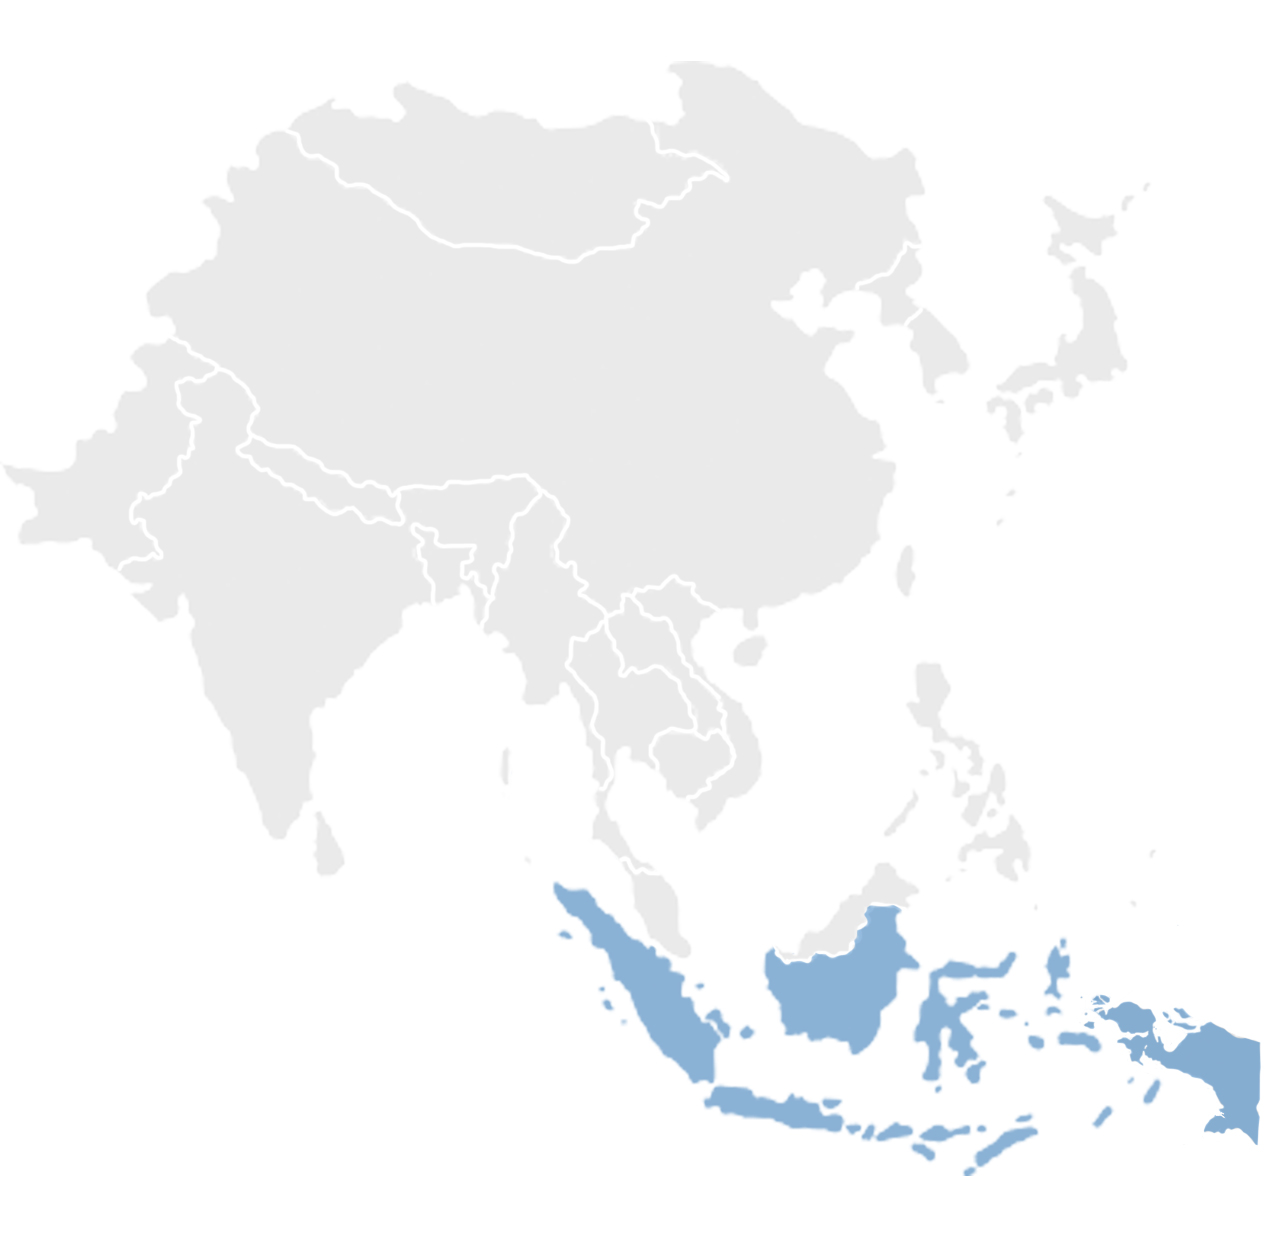 Gray map of Asia with Indonesia in blue